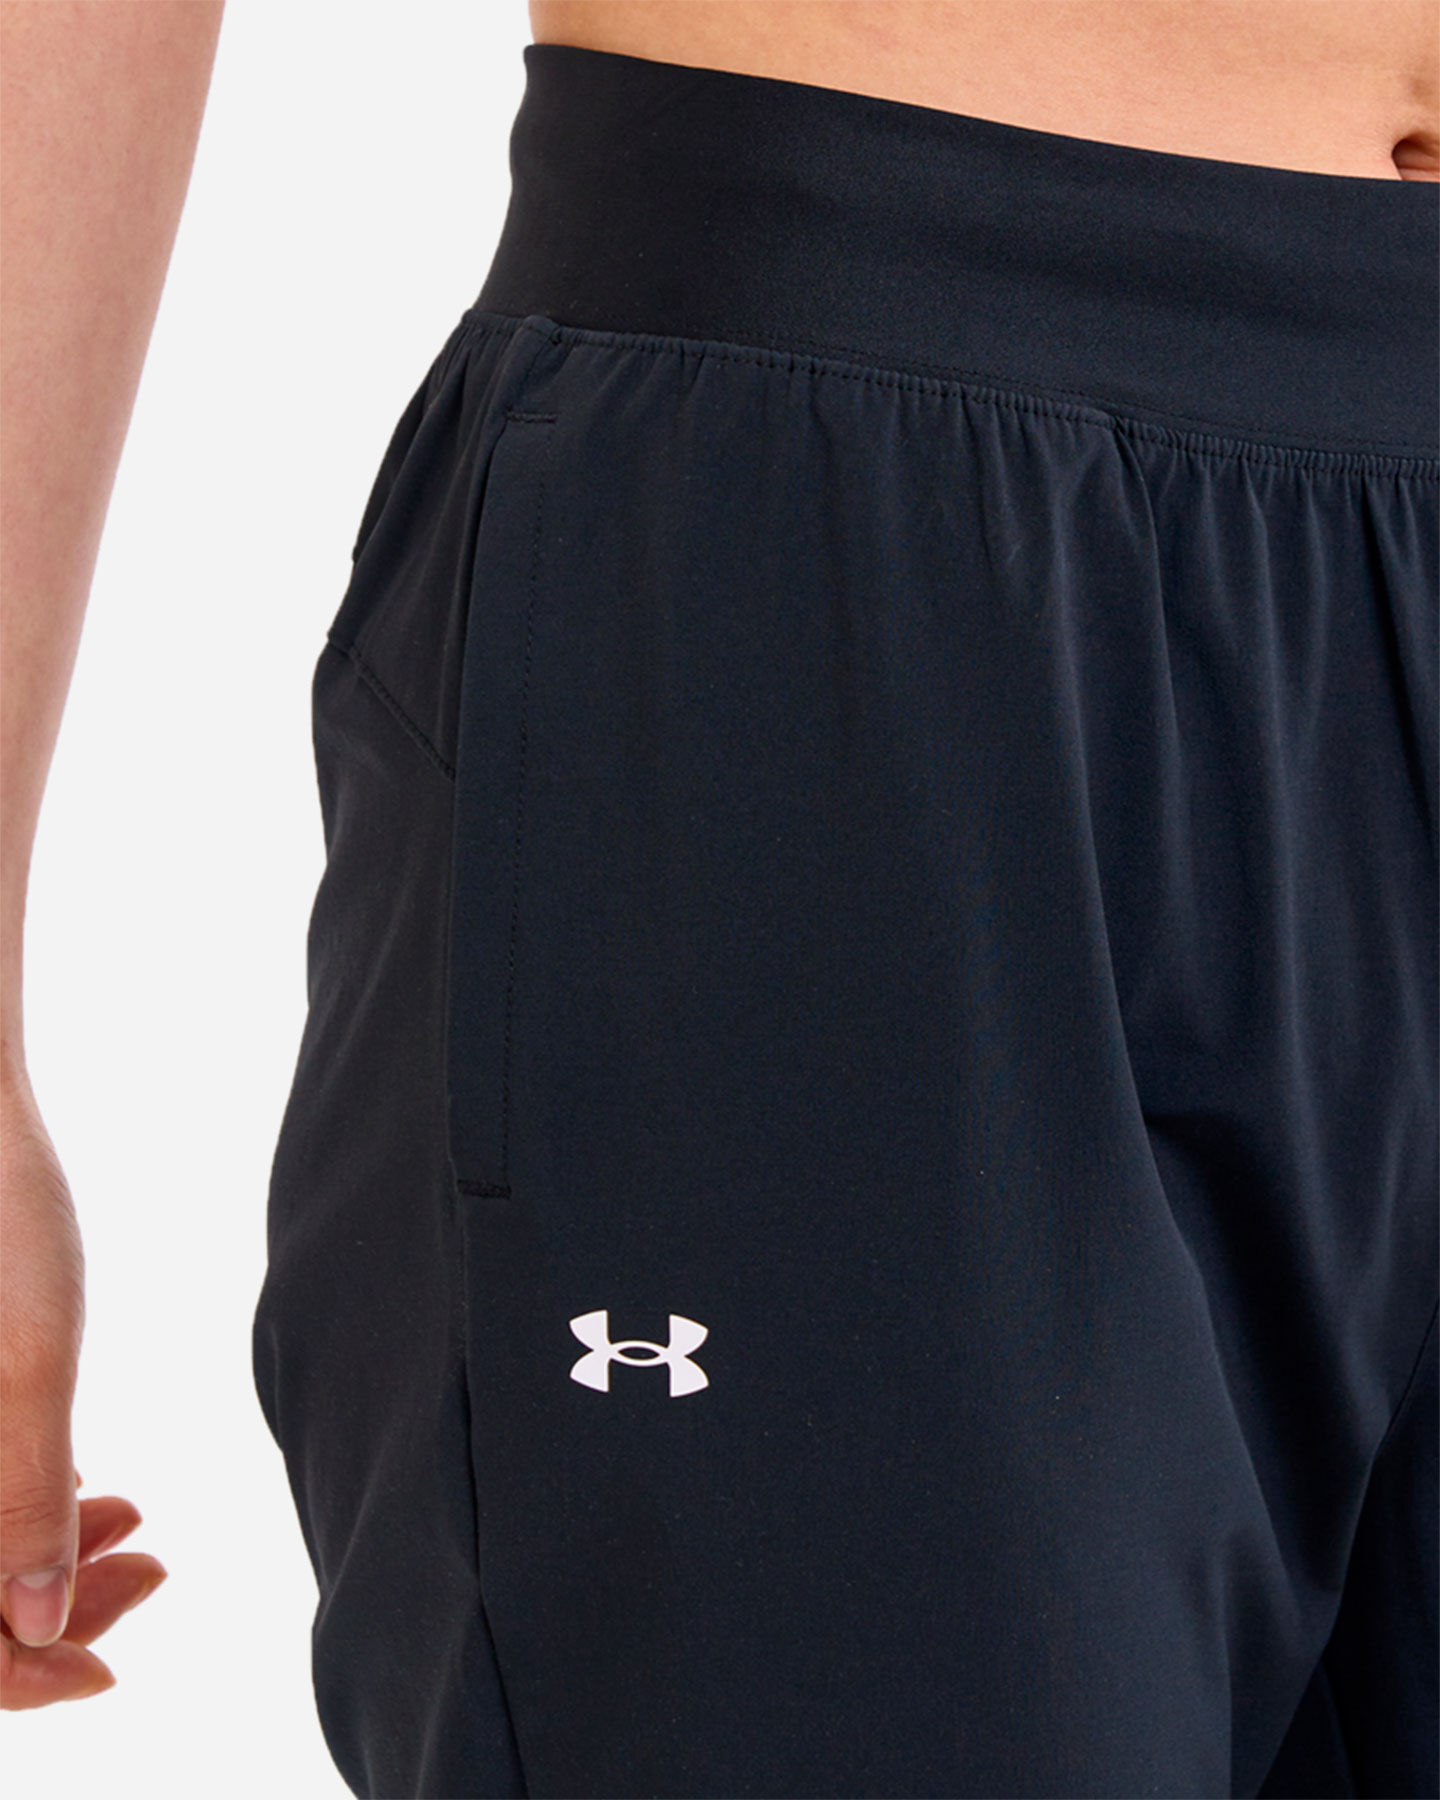  Pantalone UNDER ARMOUR WOVEN W S5641550|0001|XS scatto 4